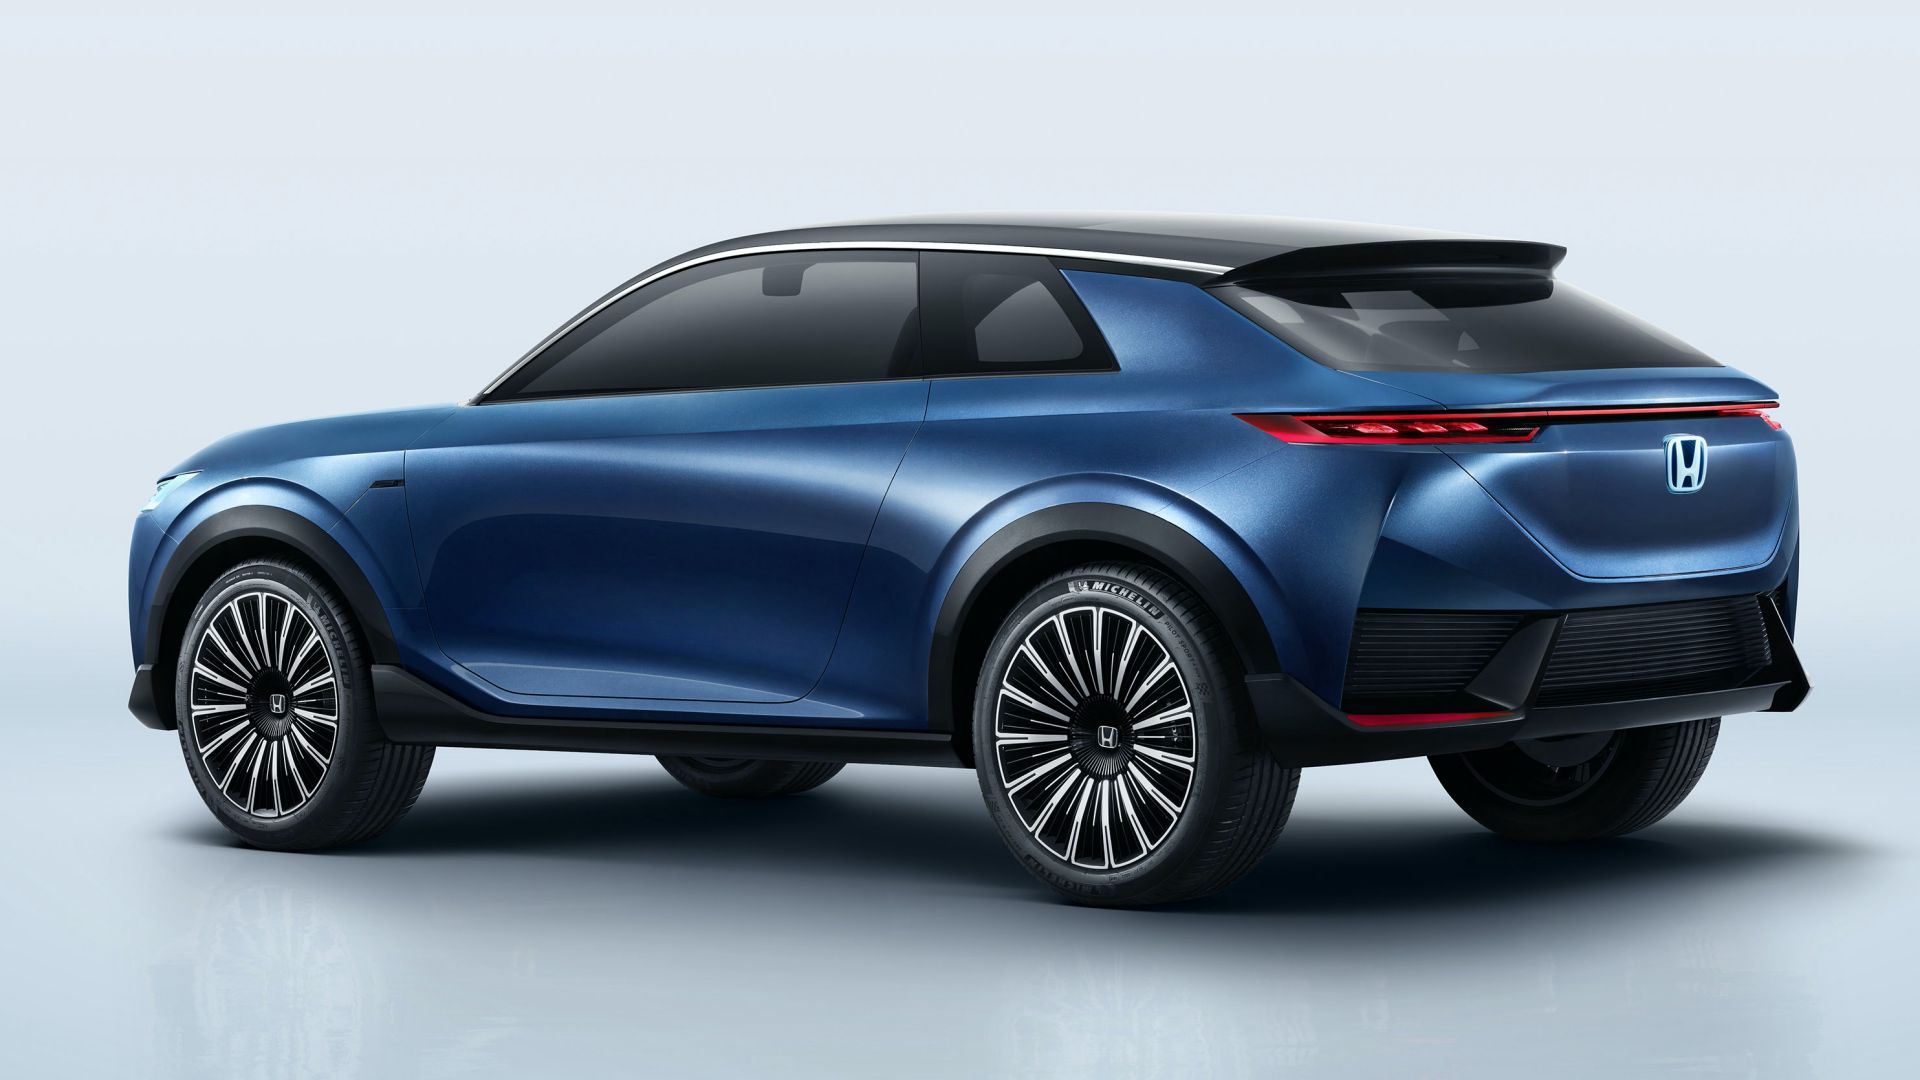 Honda SUV econcept Is An Enticing Preview Of The Brand’s First EV For